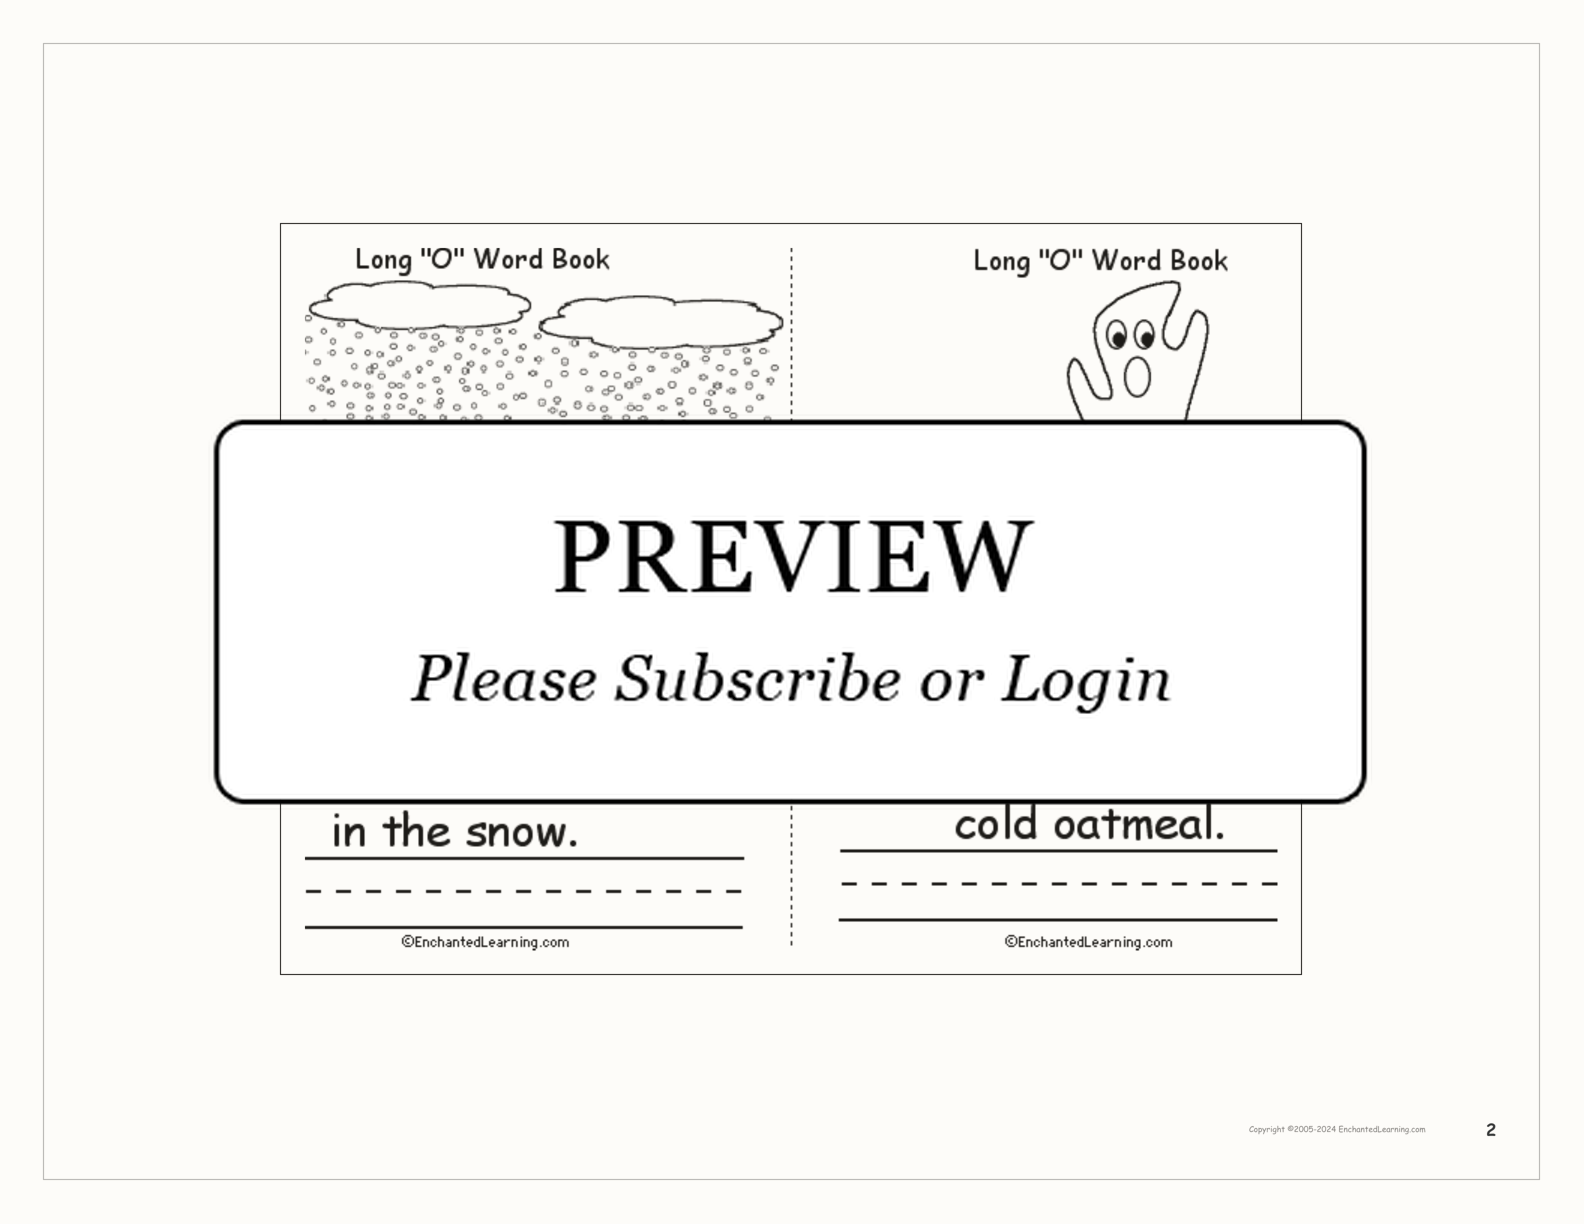 Long 'O' Words Book interactive printout page 2